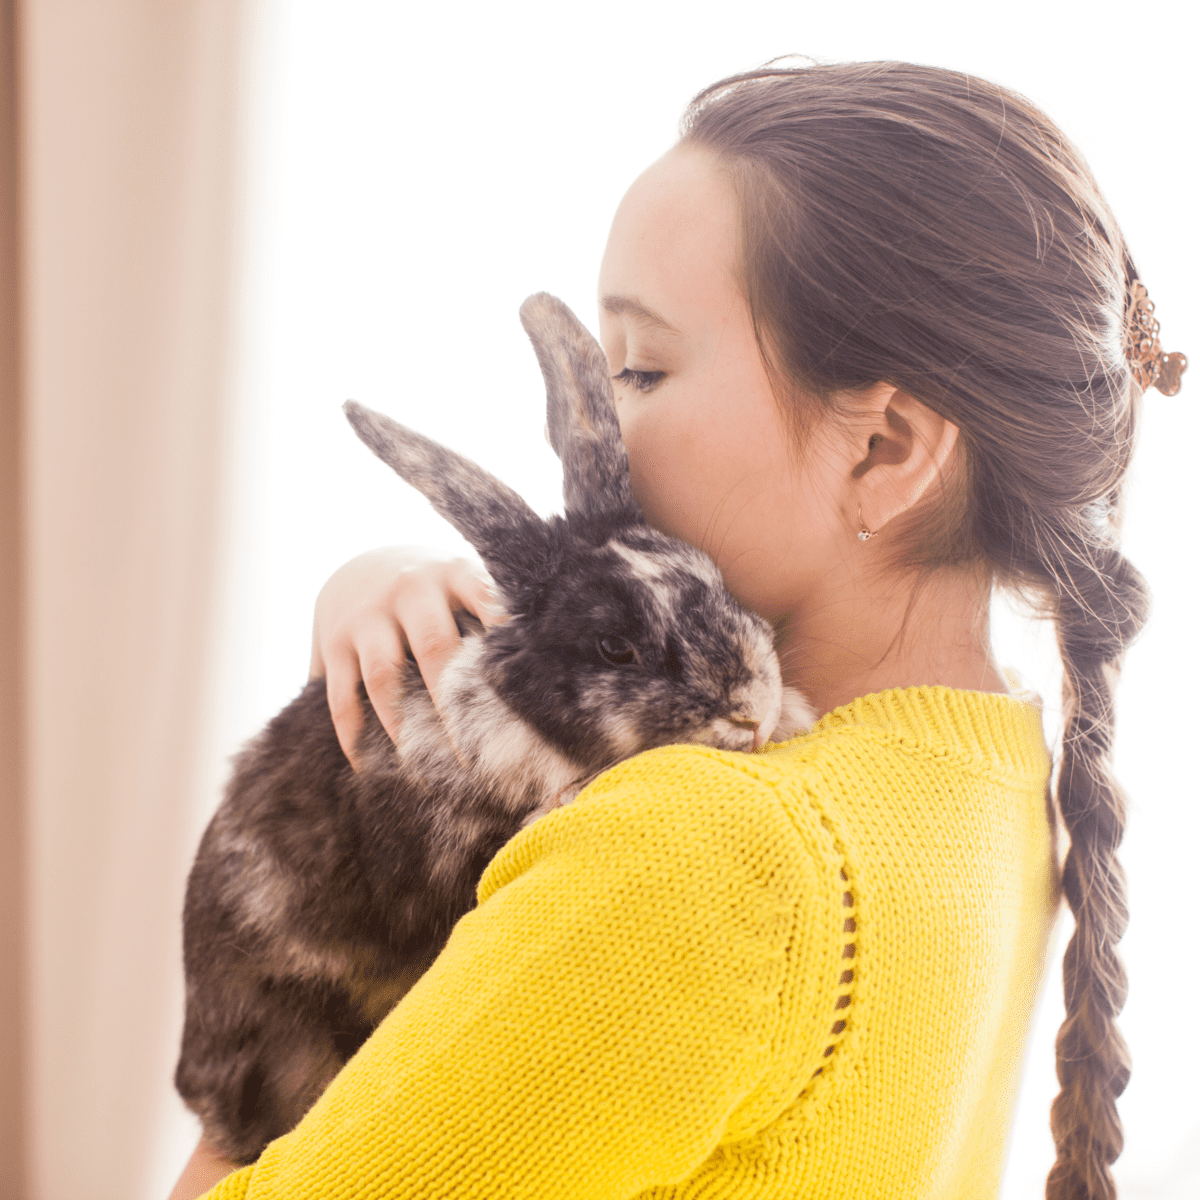 Sleepy Bunny Gets a Kiss from His Human — The Daily Bunny